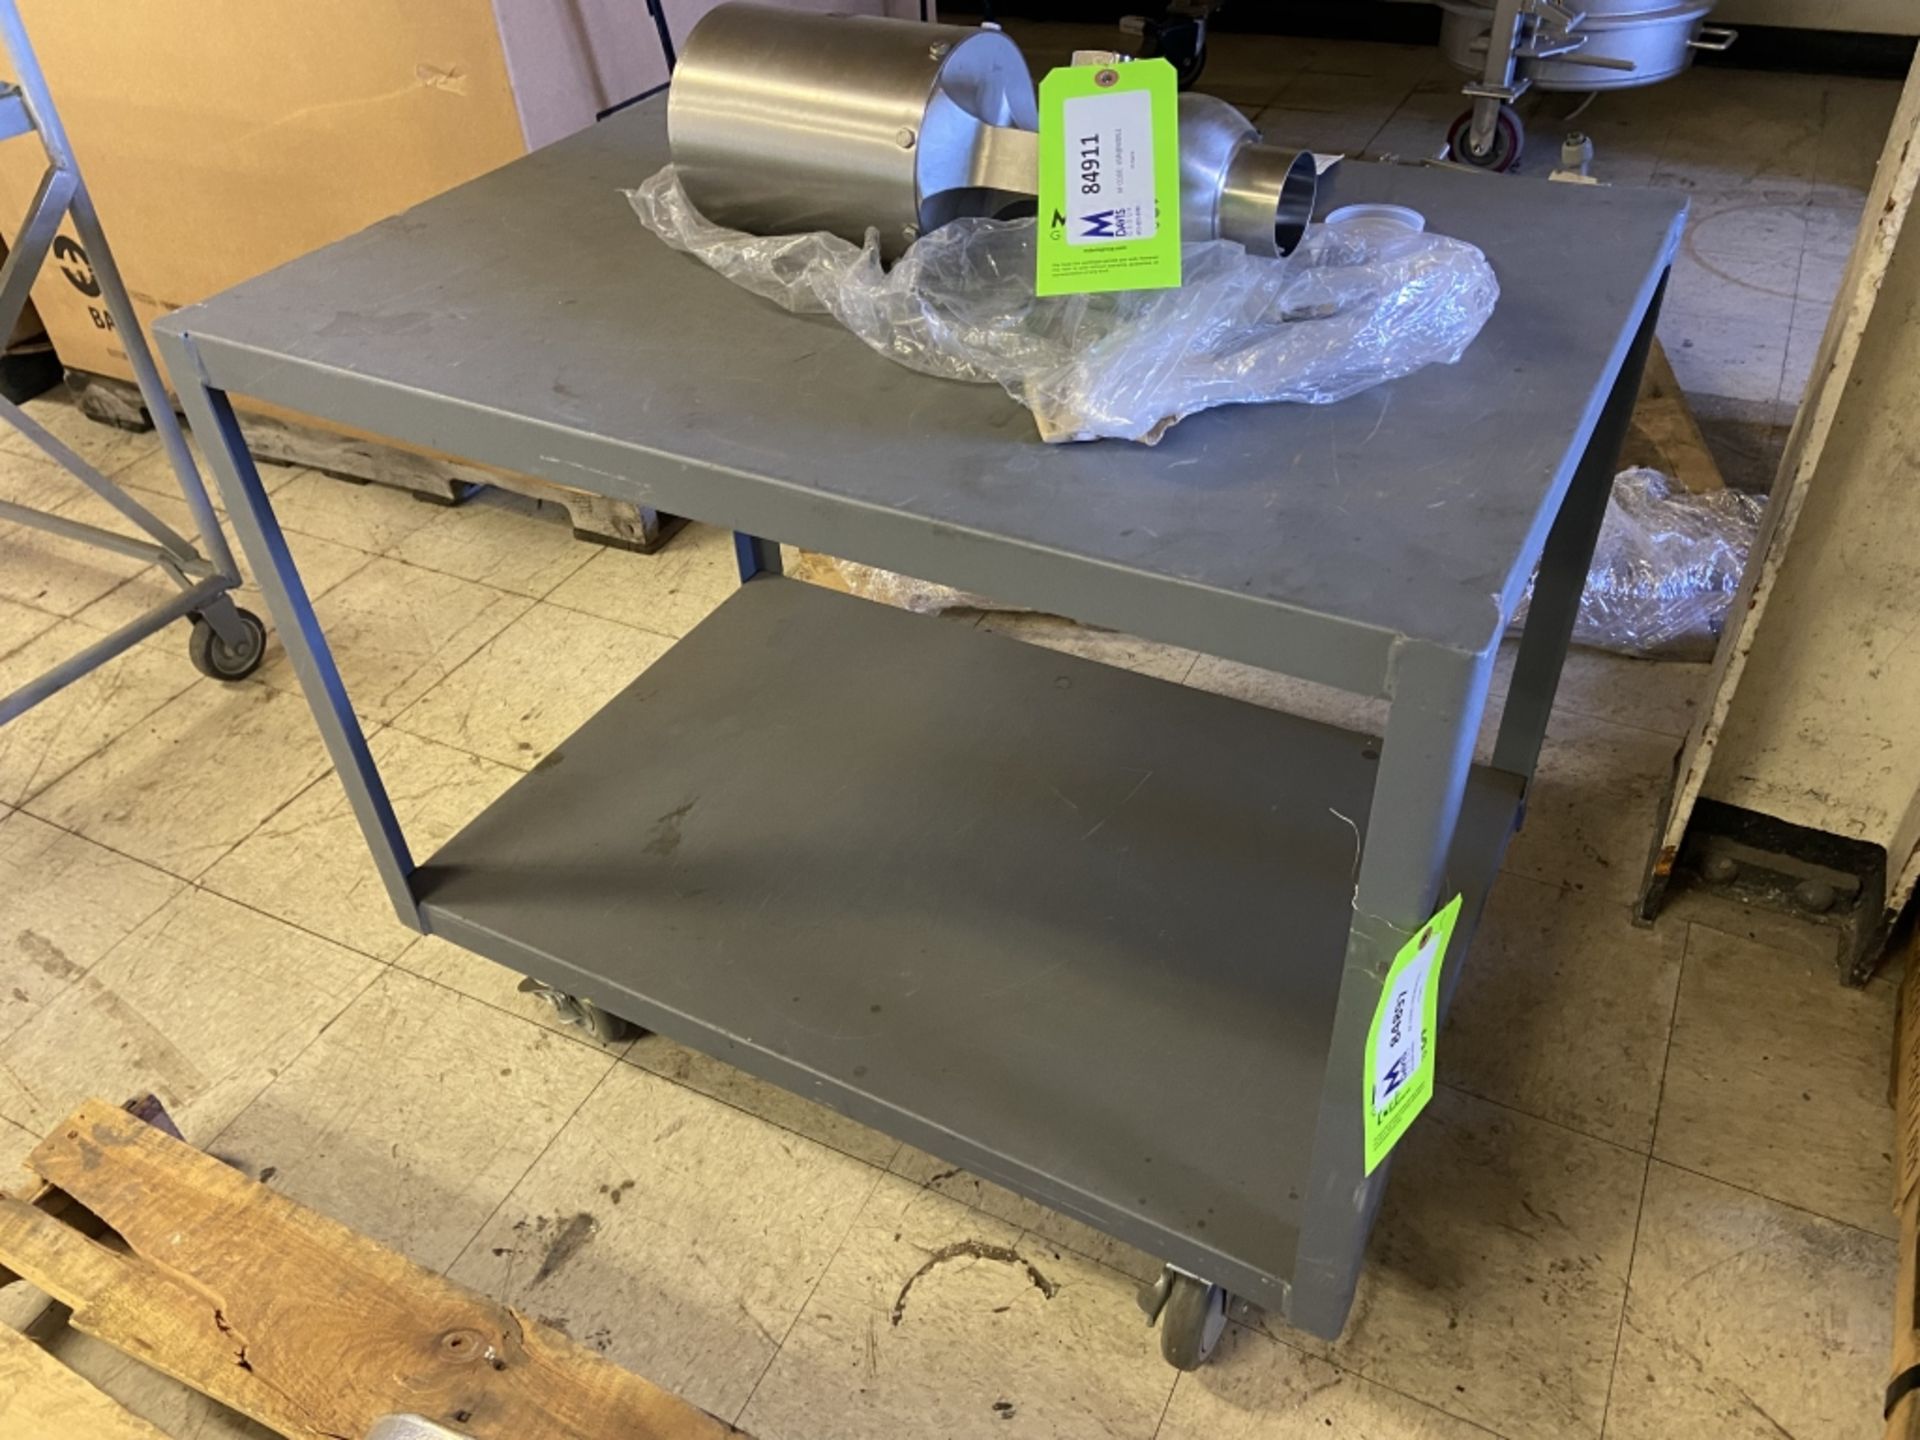 Portable Shop Cart, with Bottom Shelf, Overall Dims. Aprox. 36" L x 24" W x 30" H, Mounted on